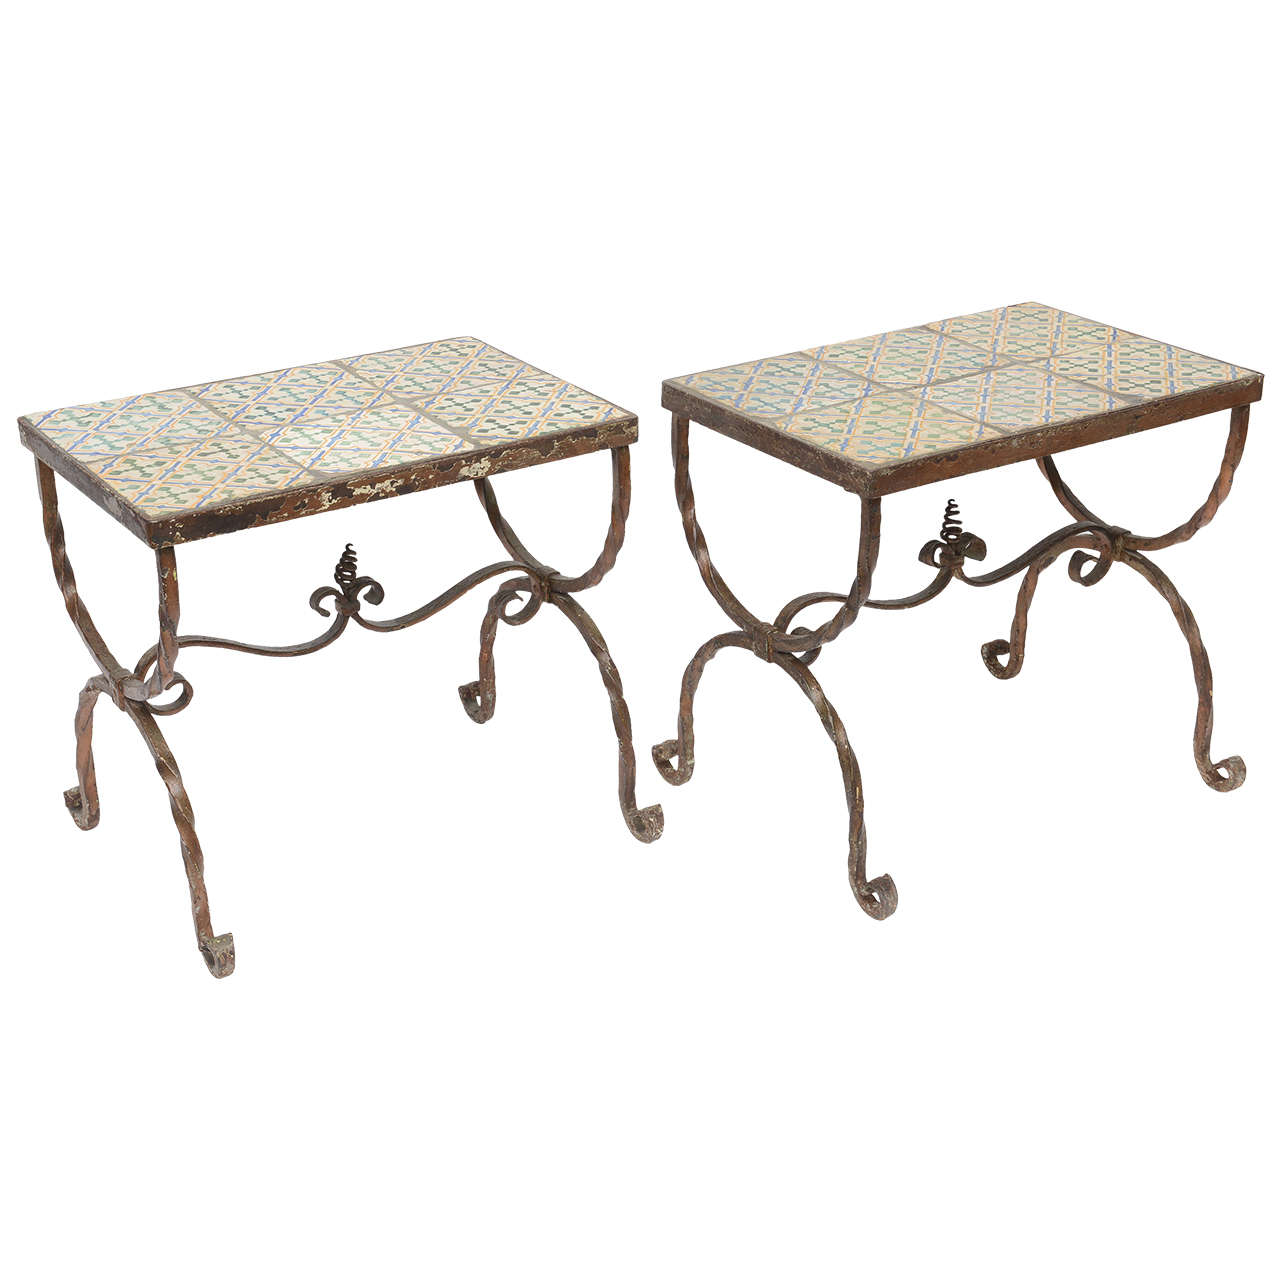 Pair of Tile-Top Iron Tables